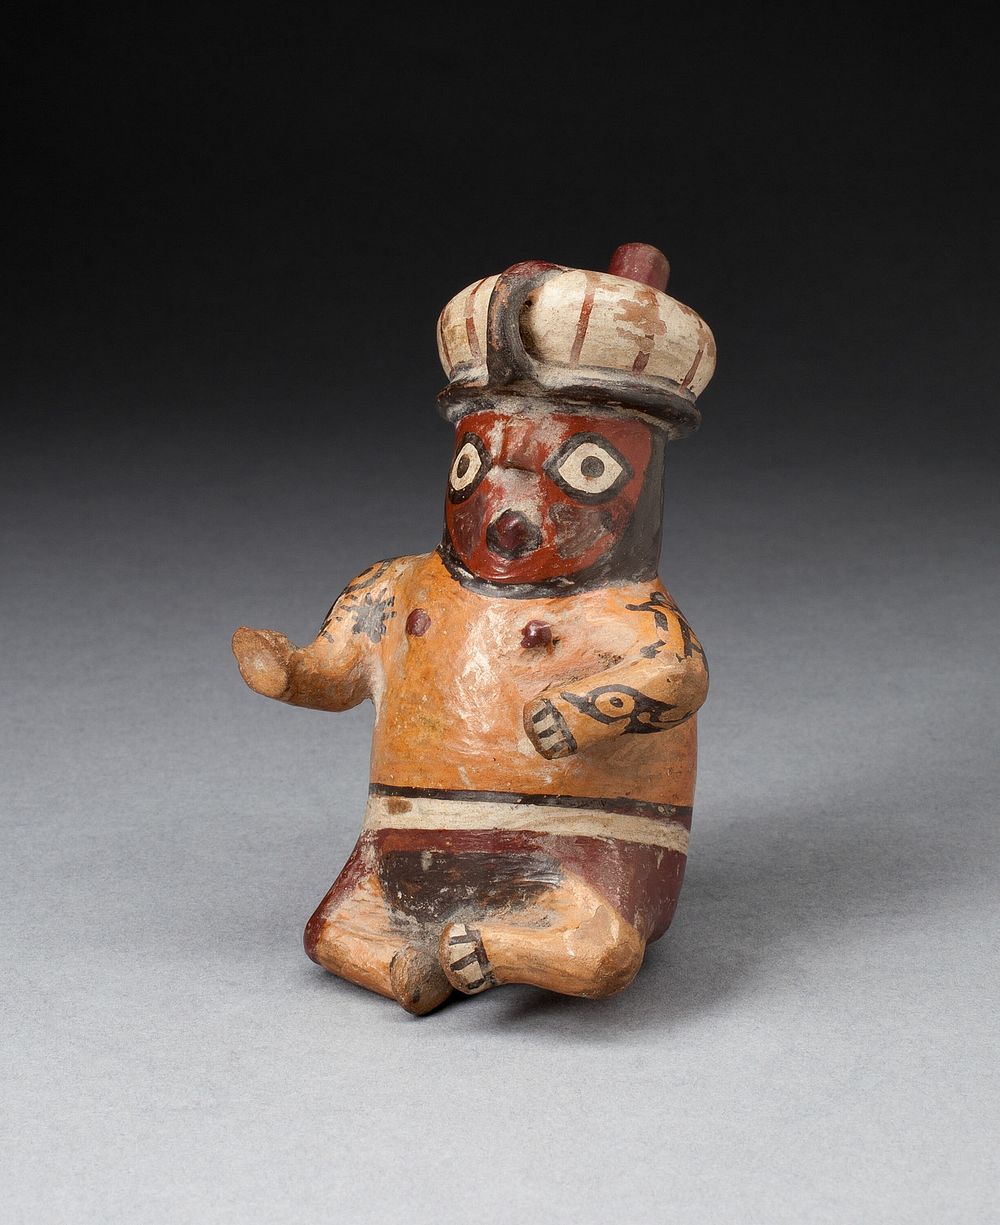 Miniature Spouted Jar in the Shape of a Seated Figure by Nazca